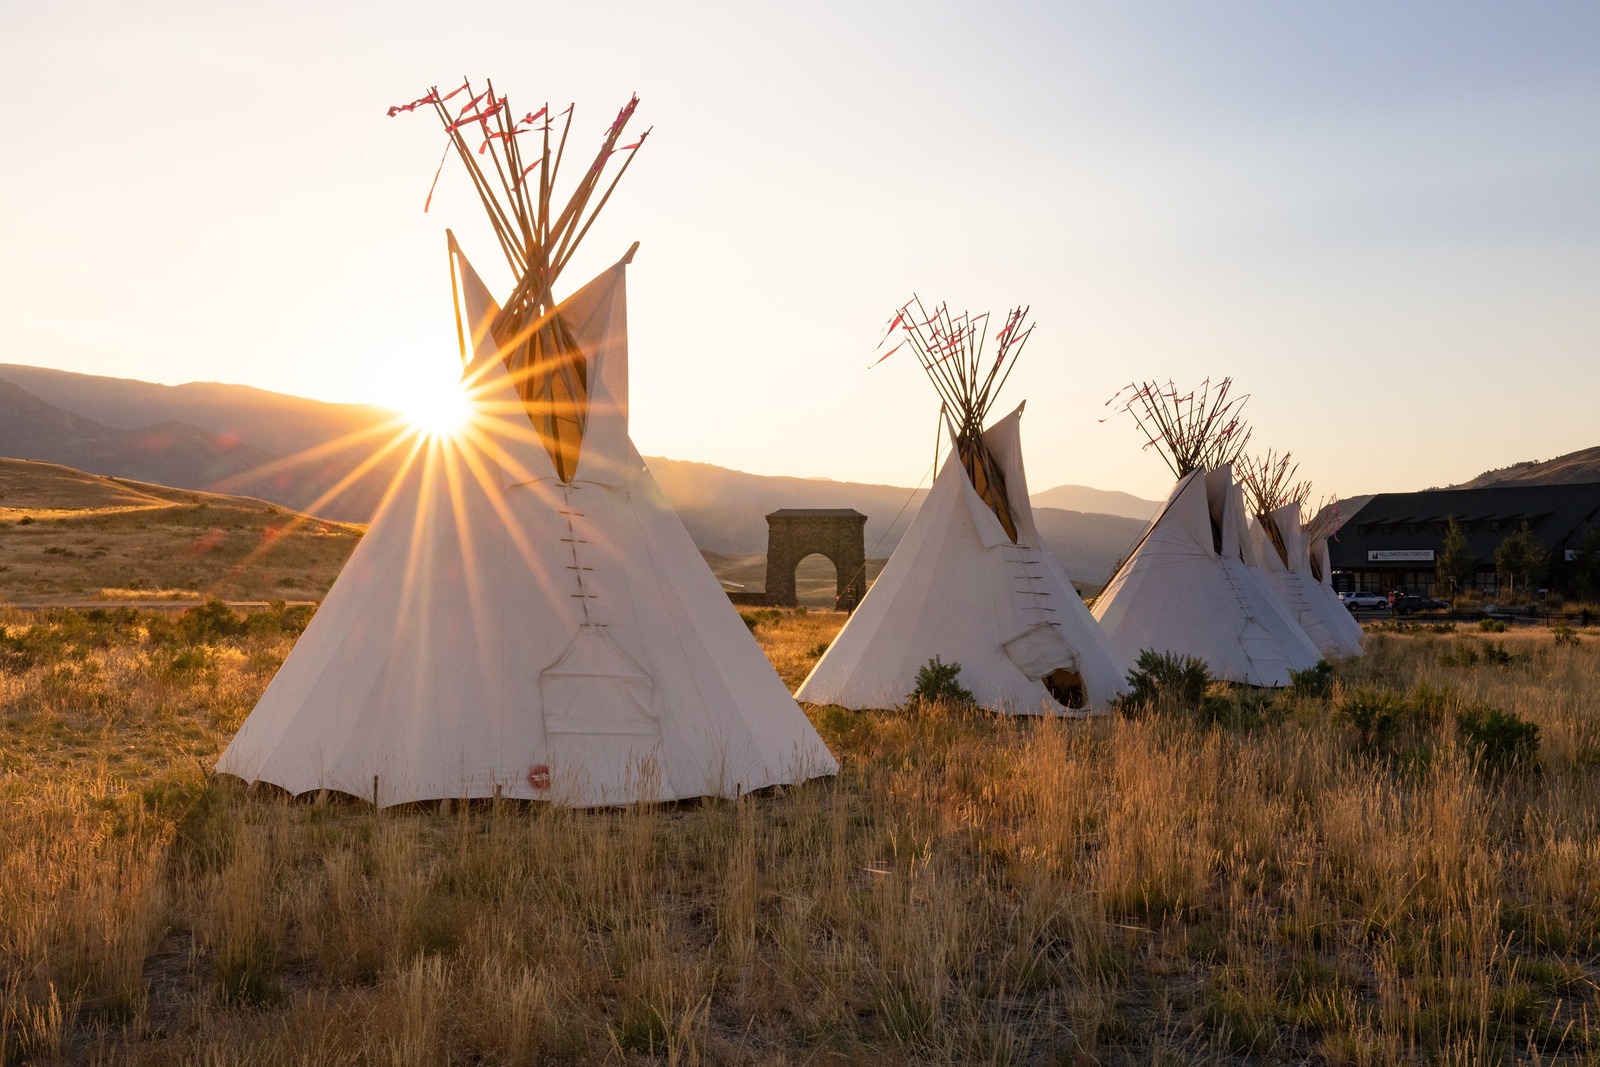 In Yellowstone during the summer of 2022, different tipi encampments were set up in the park to honor historic connections and remind millions of visitors that indigenous people haven't gone away, nor are they artifacts. Connections still run deep.  Still, there's a question: if Yellowstone had not been created as a park, which tribes would have had the most legitimacy to lay claim to it—those who were in the park last or those who came before them?Photo of tipi encampment at north end of Yellowstone on the edge of Gardiner, Montana by Jacob W. Frank/YNP